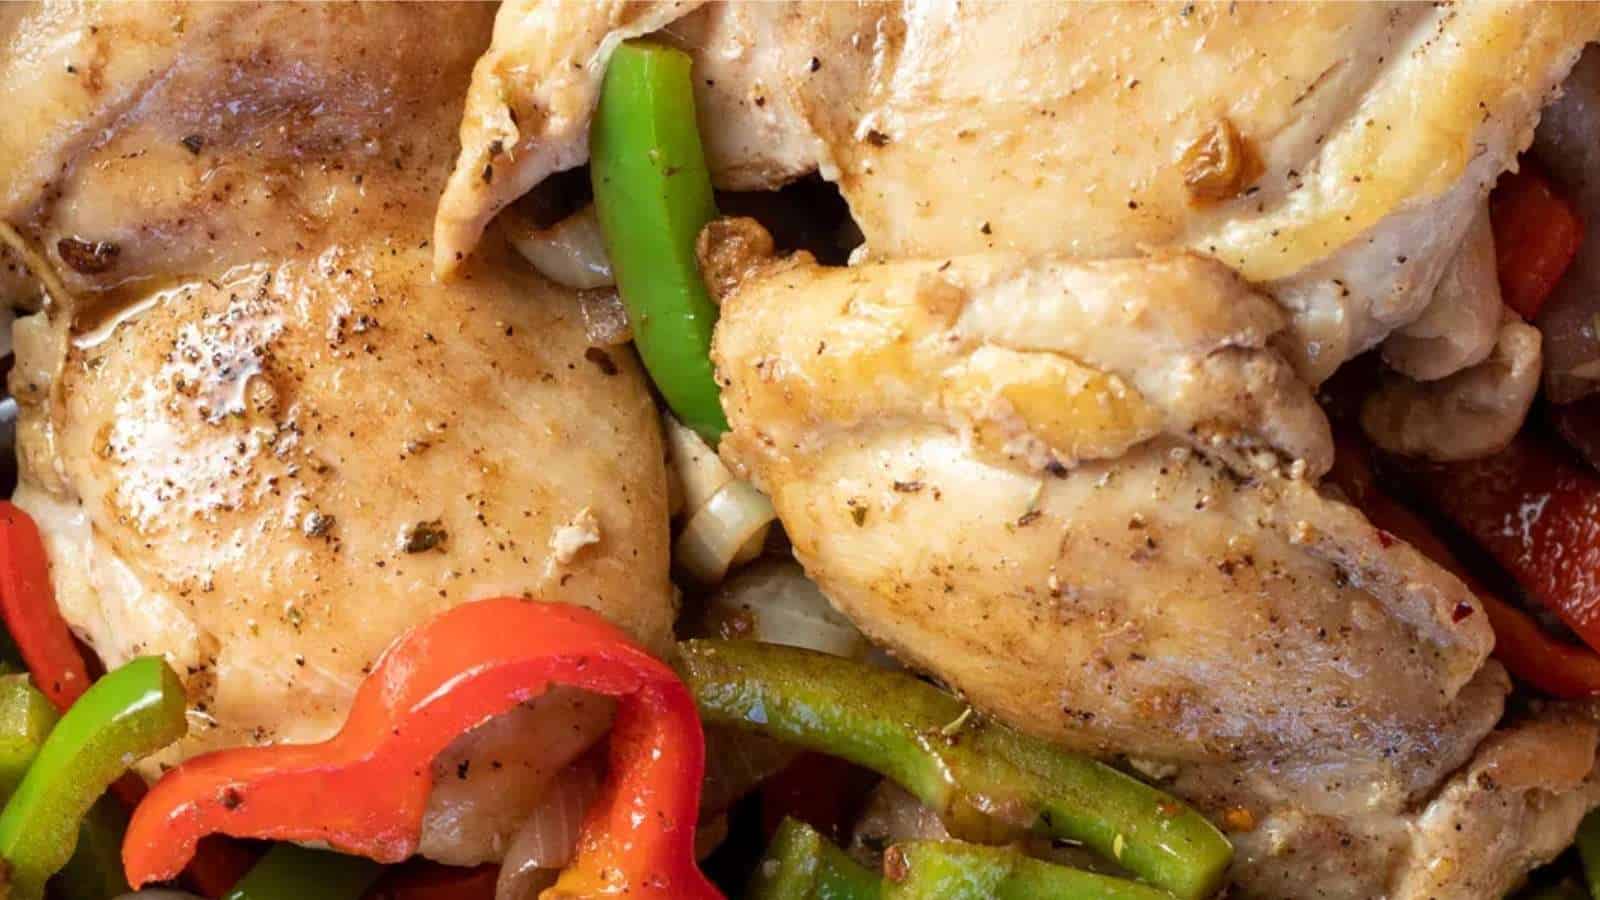 A close up of chicken and peppers on a plate.